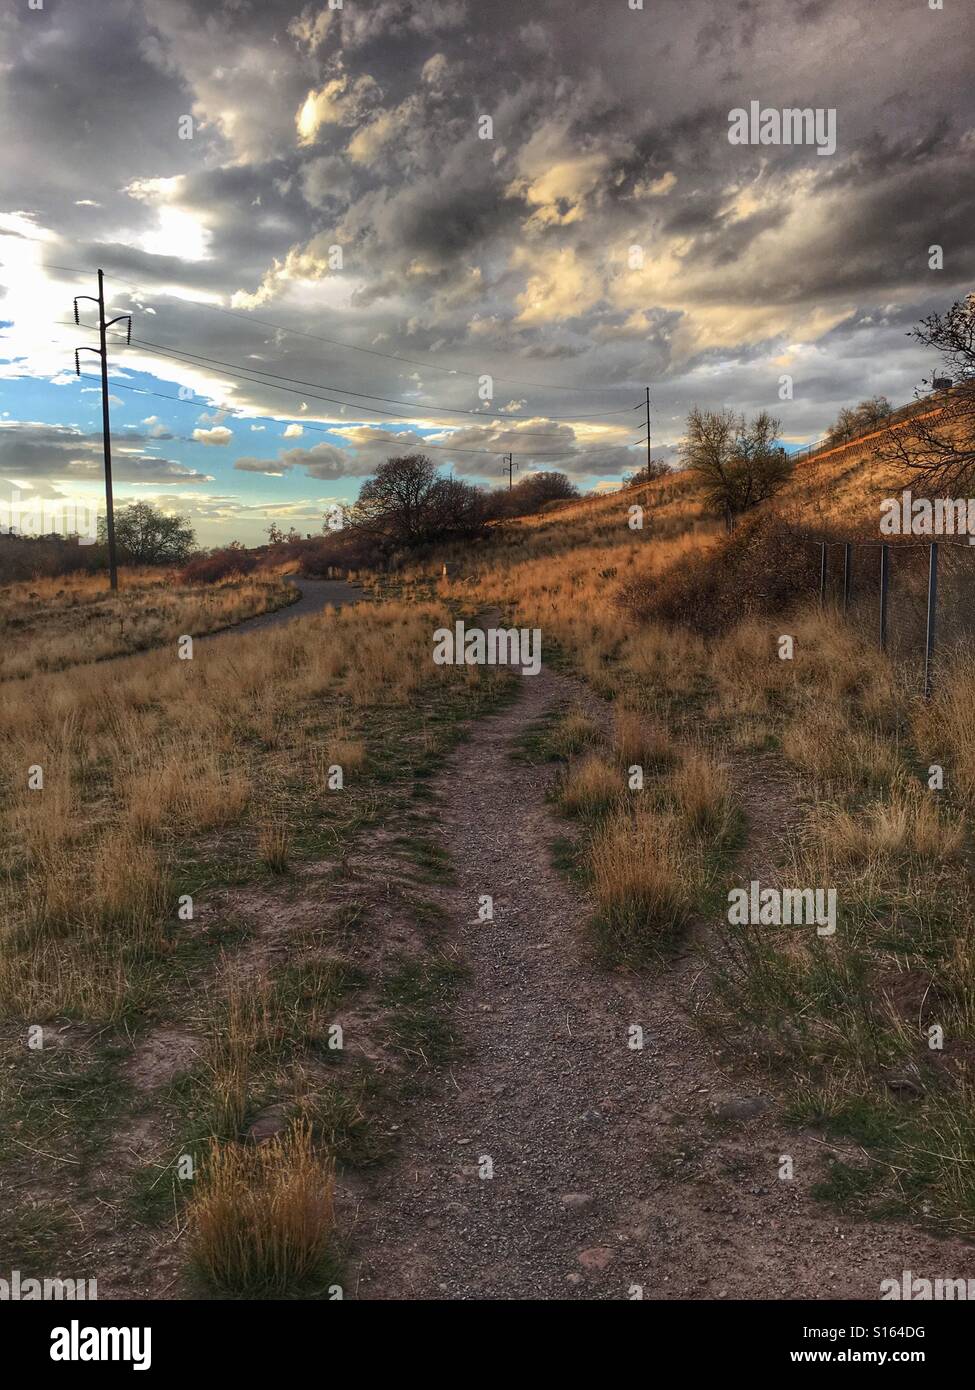 A dirt path winds along next to a paved bike trail on an autumn afternoon. Stock Photo